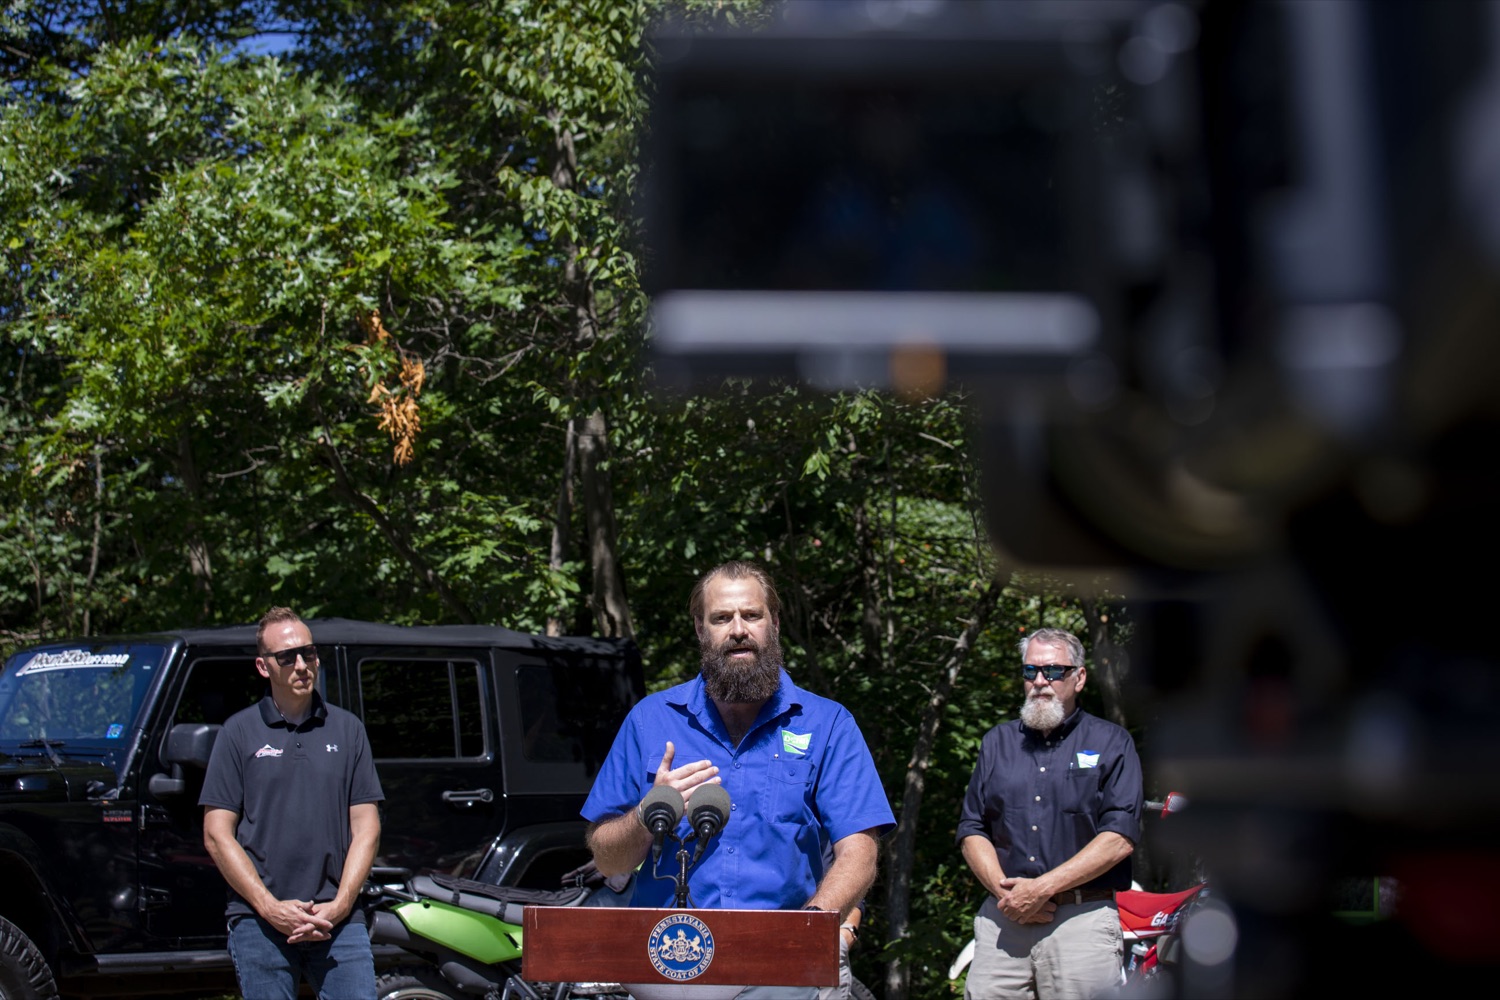 Pennsylvania Director of Outdoor Recreation Nathan Reigner discusses the acquisition of a 5,600-acre tract of land that will be developed into a new motorized recreation area, in McAdoo, PA on August 12, 2022.<br><a href="https://filesource.amperwave.net/commonwealthofpa/photo/22090_dcnr_RecreationArea_20.jpg" target="_blank">⇣ Download Photo</a>